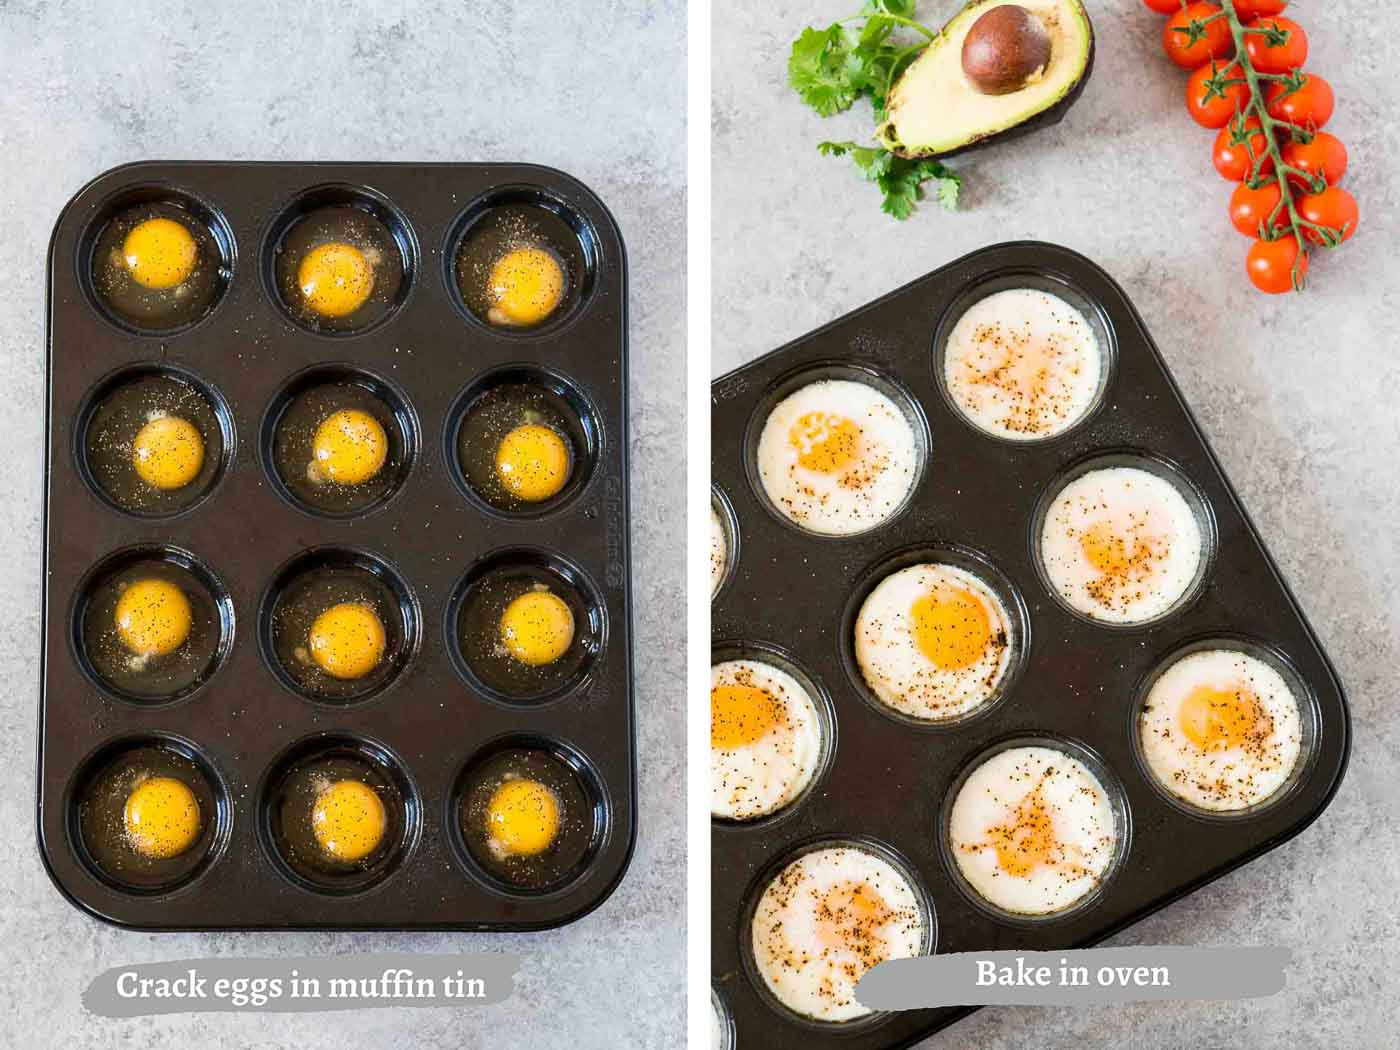 process images of baking eggs in the oven